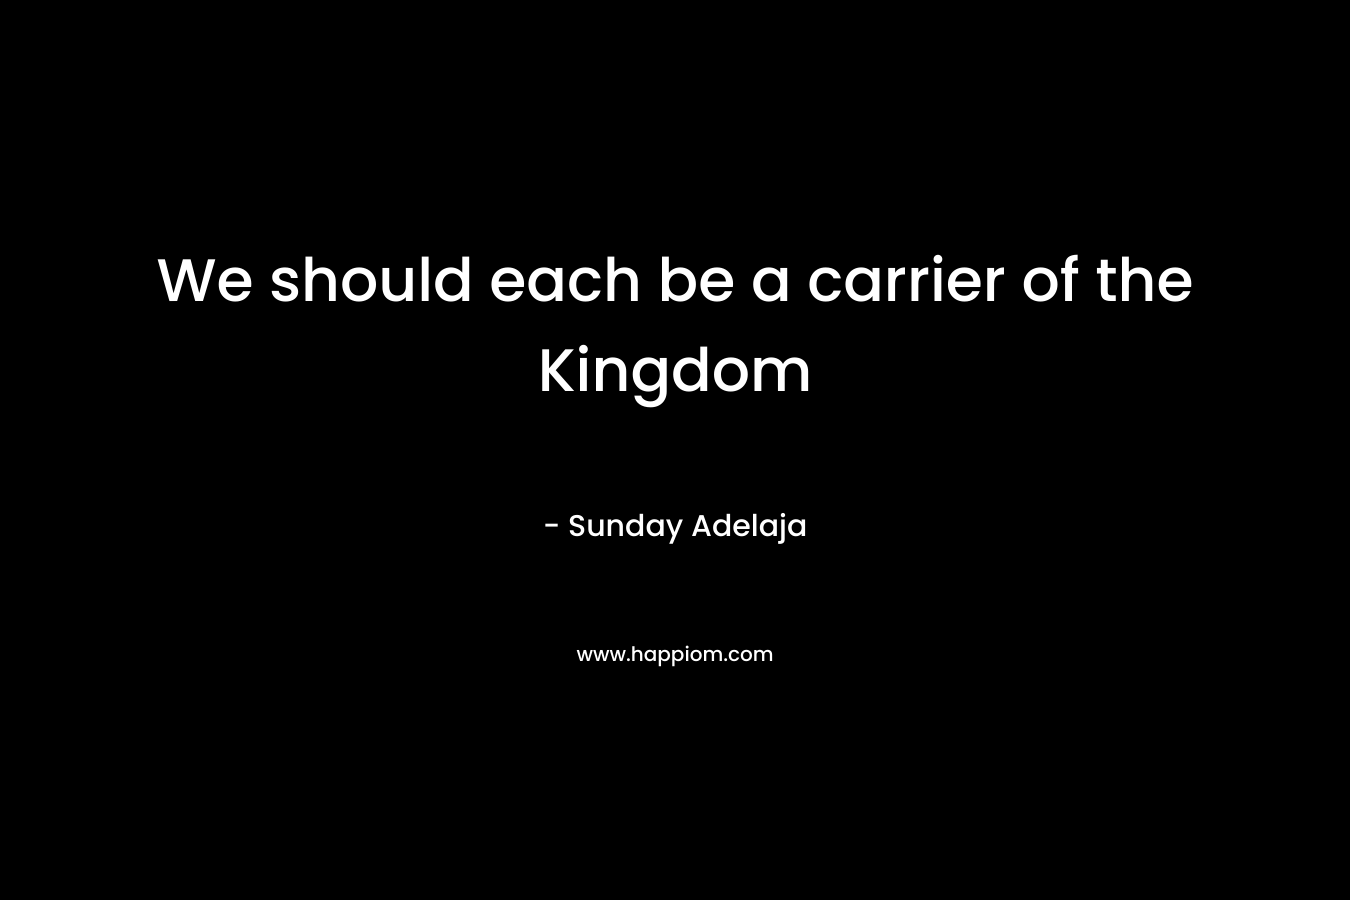 We should each be a carrier of the Kingdom